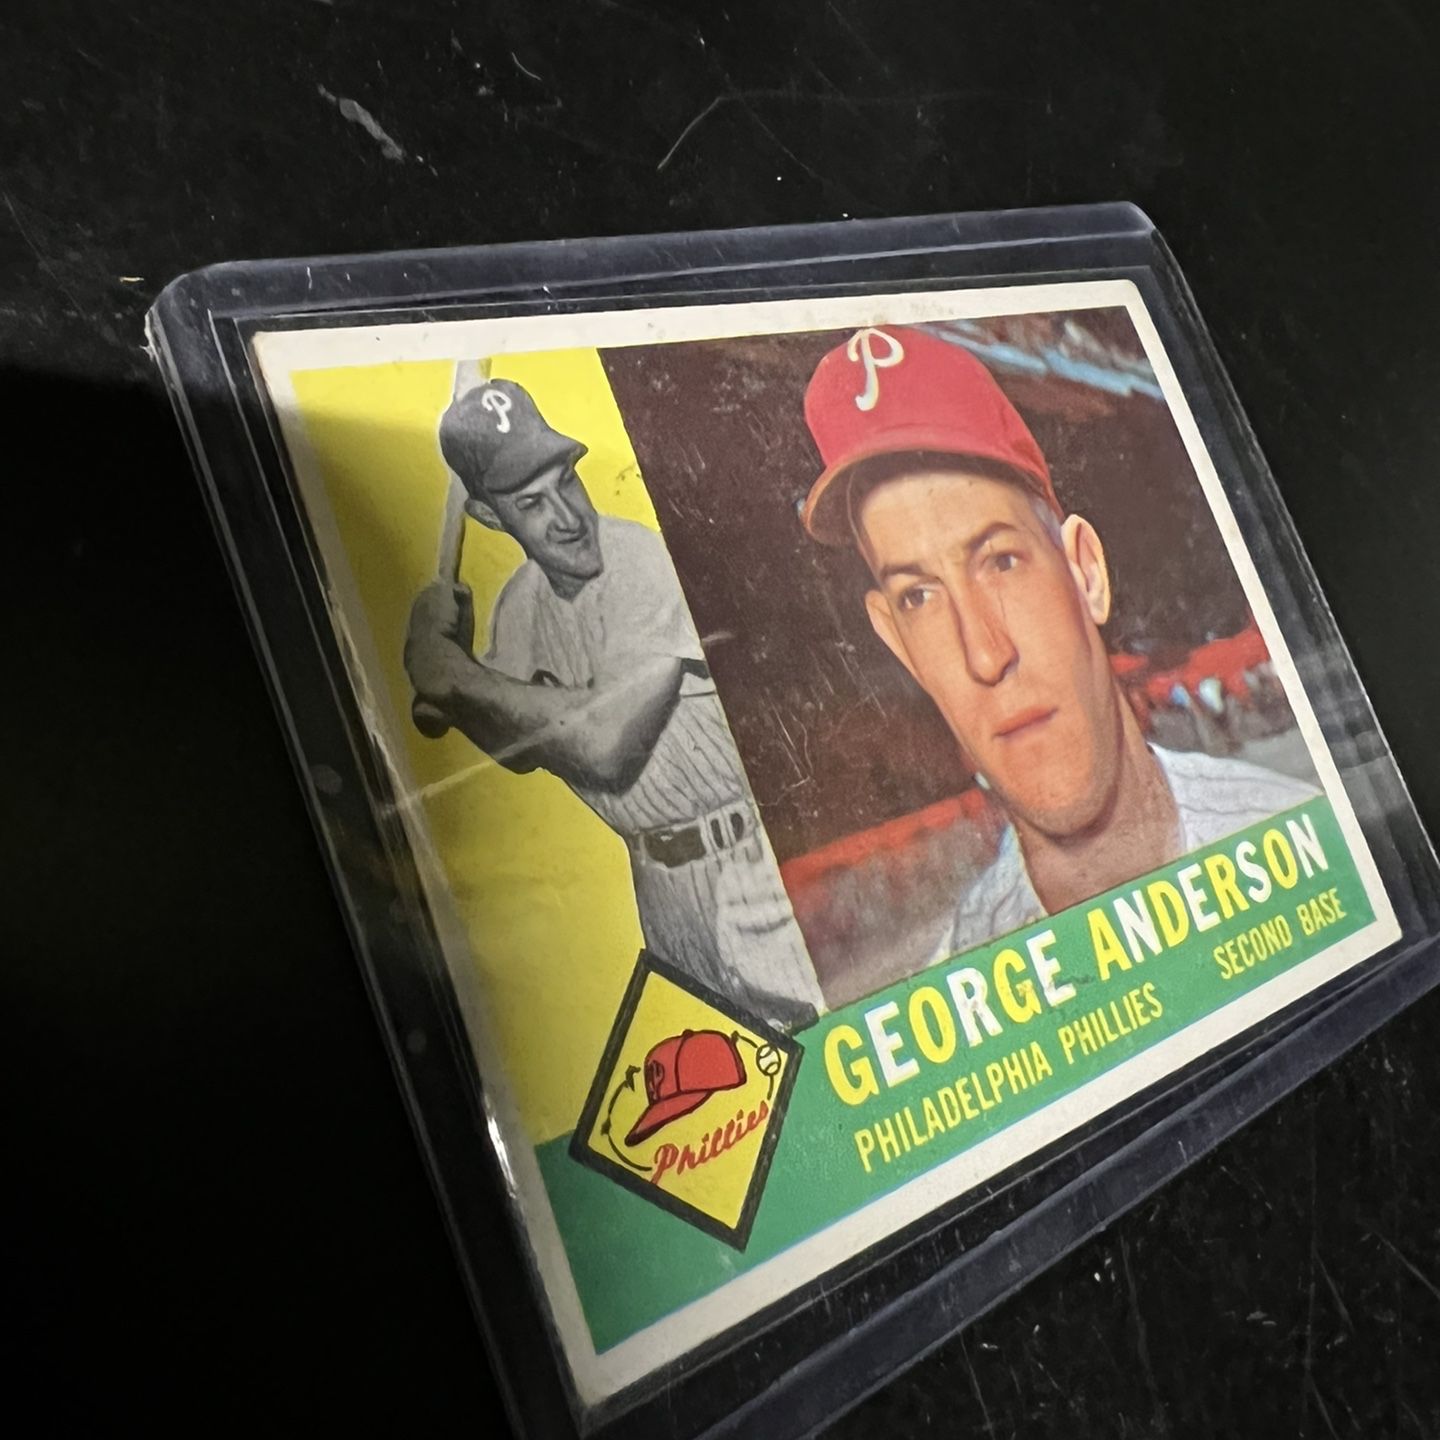 1960 Topps #34 Sparky Anderson Baseball Card for Sale in Washougal, WA -  OfferUp